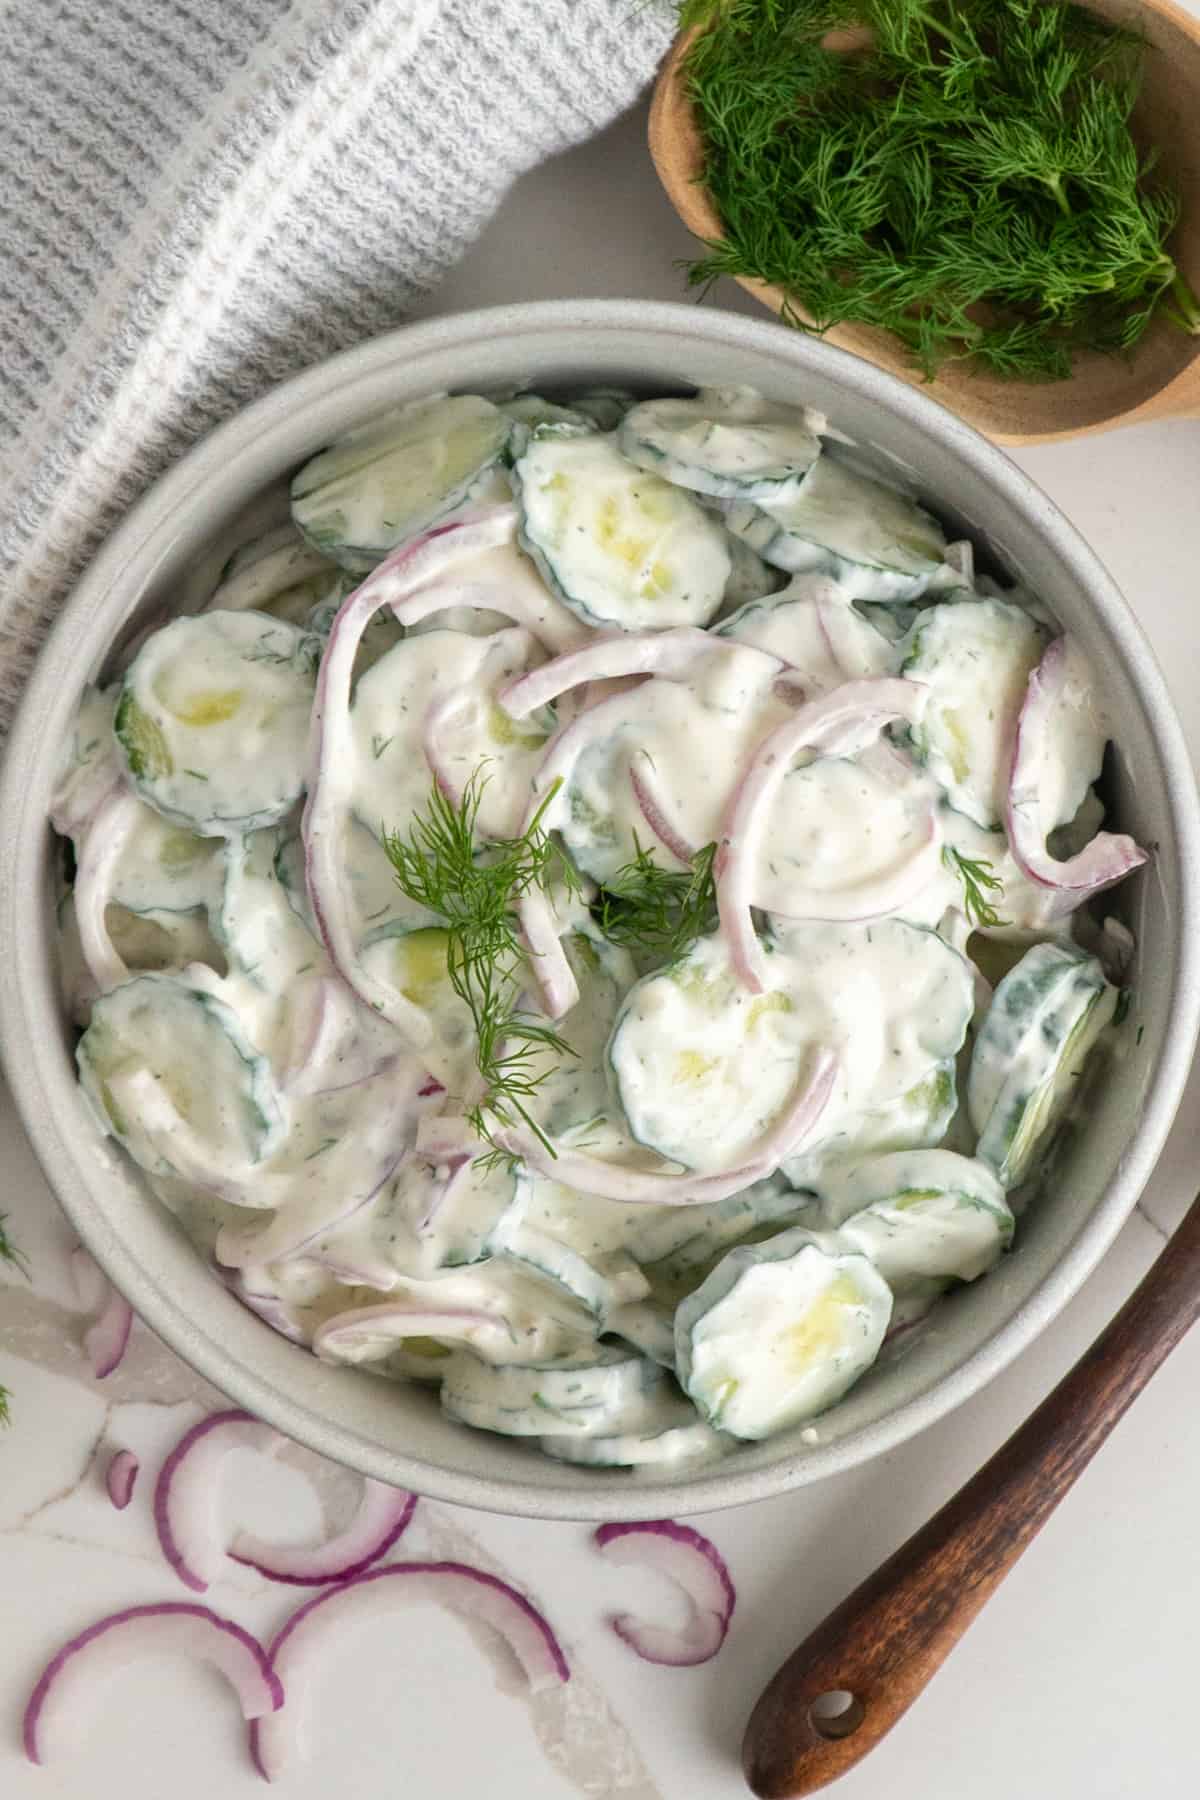 Overhead look at creamy cucumber salad in a bowl.